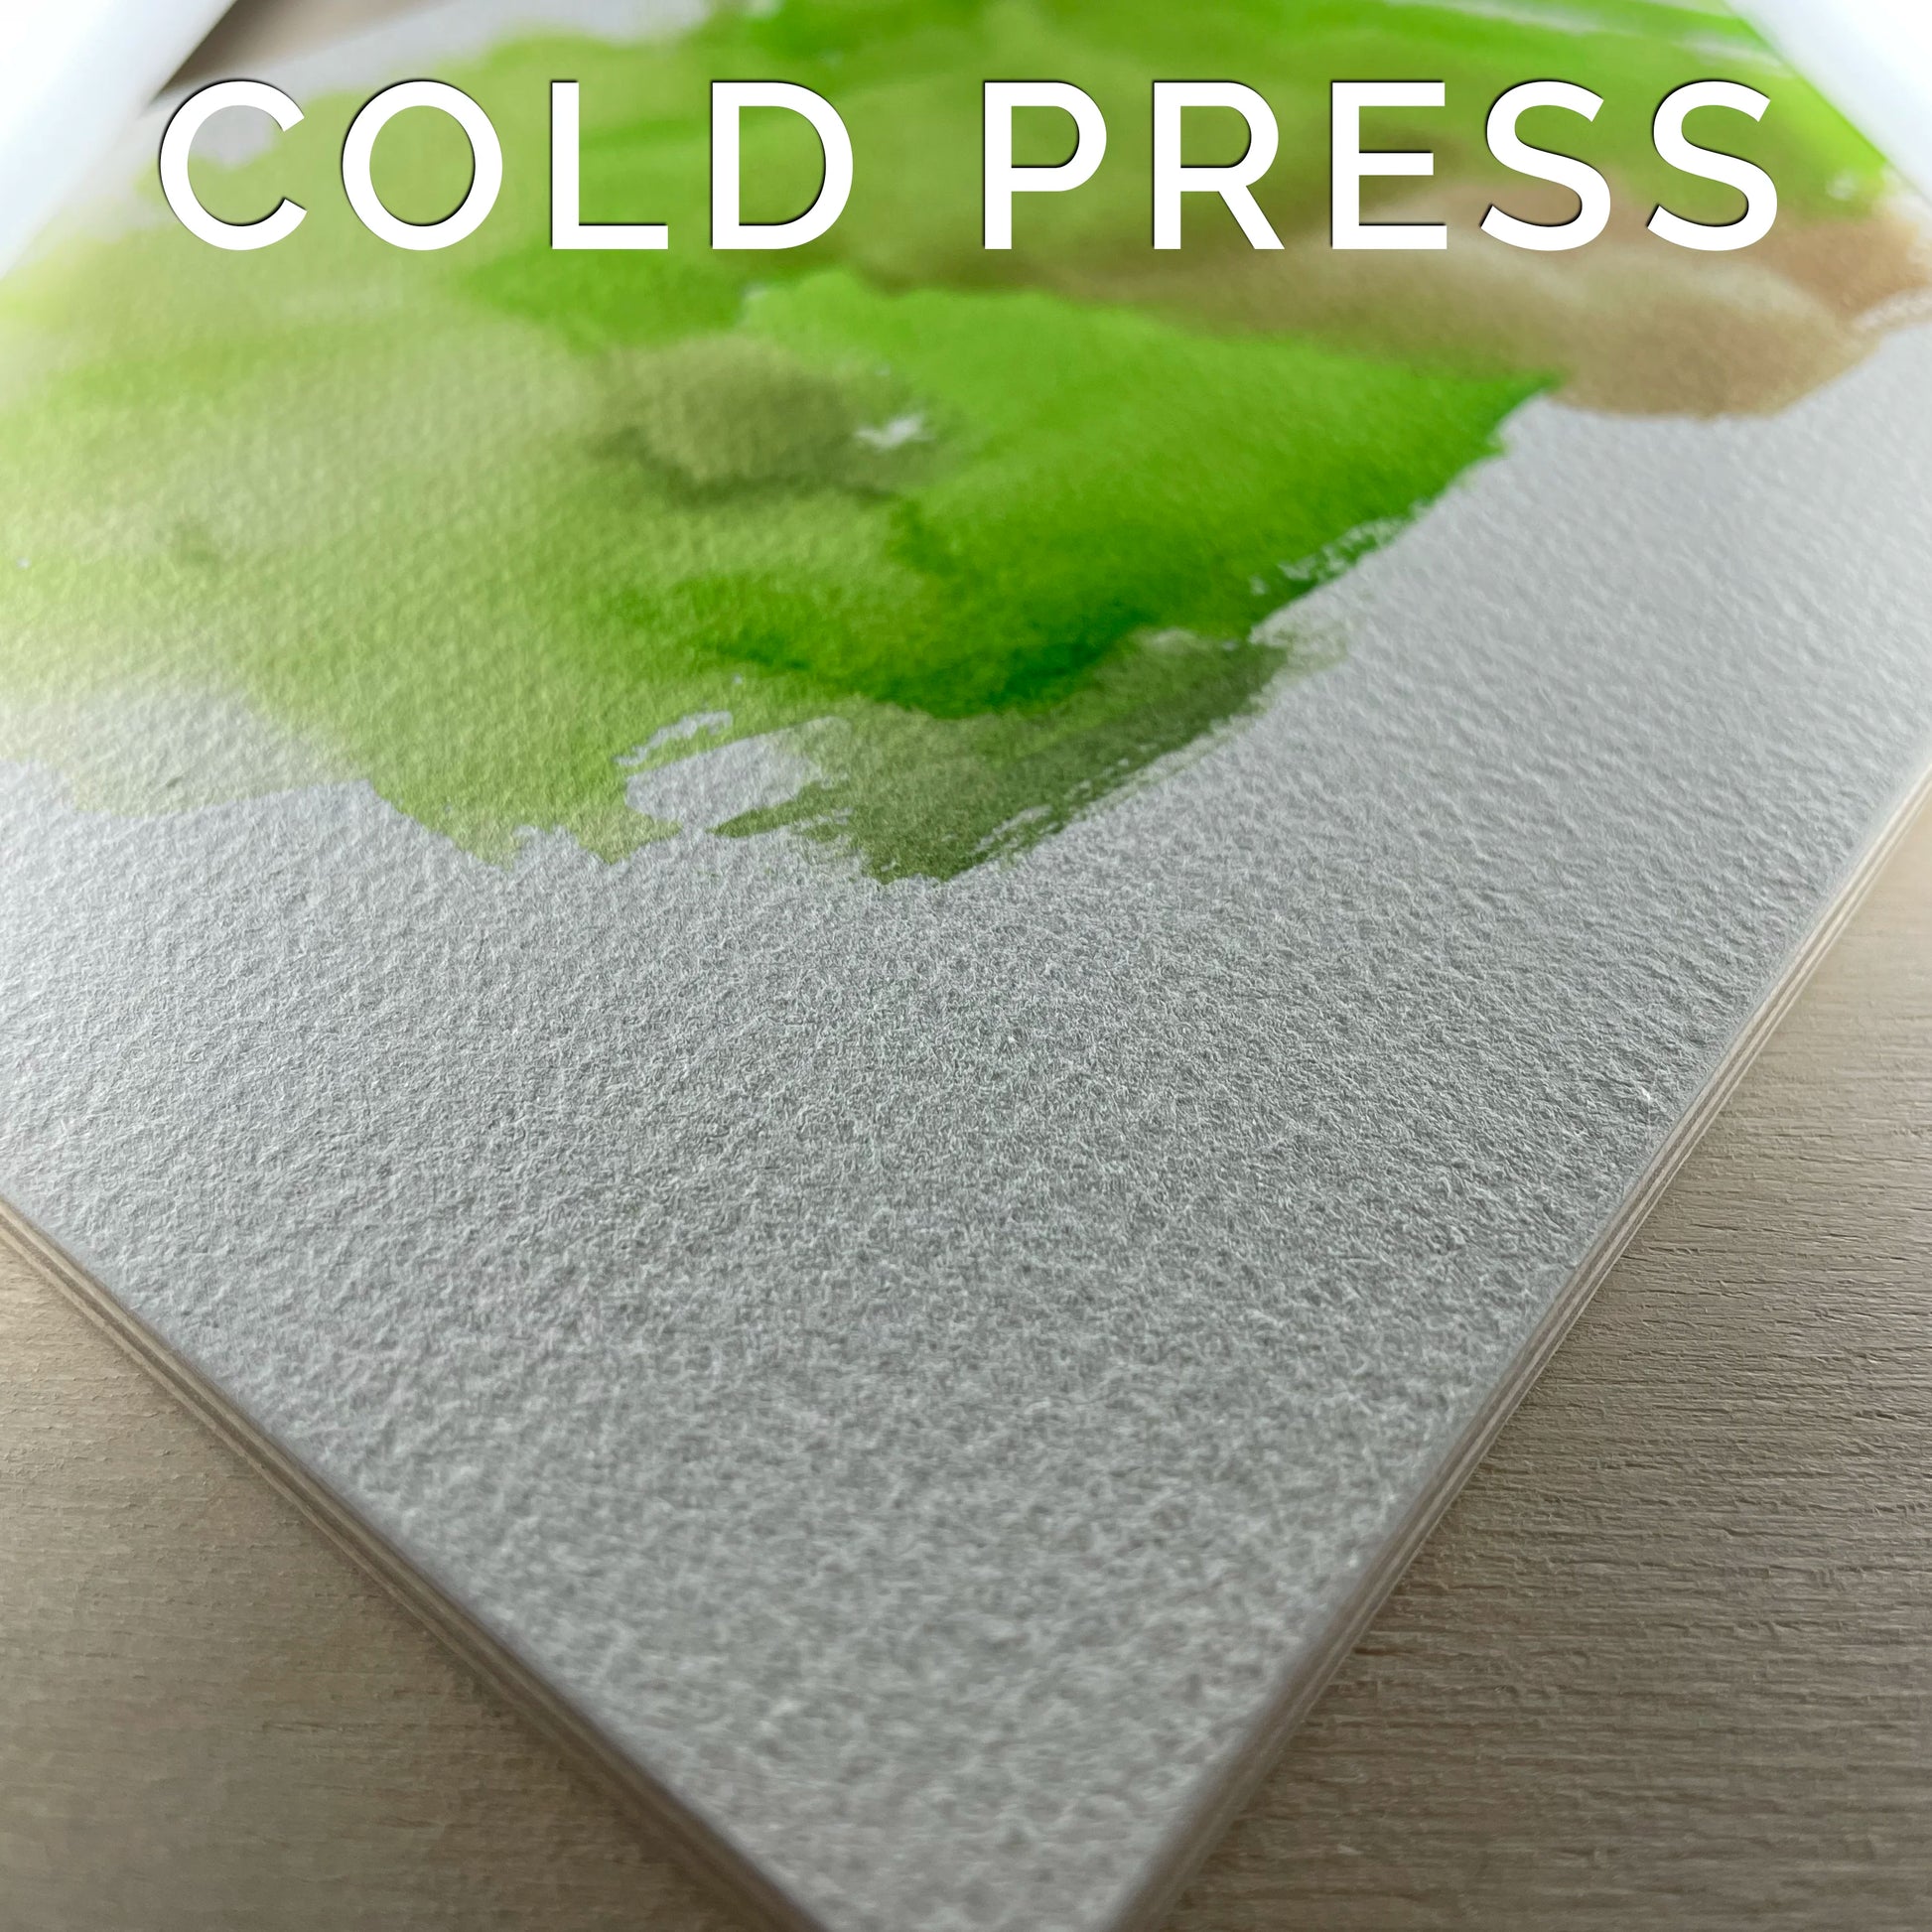 Cold Press Watercolor Paper Panel - 1/4" Baltic Birch Wooden Art Canvas for Watercolor Paint Fabriano Paper Trekell Art Supplies